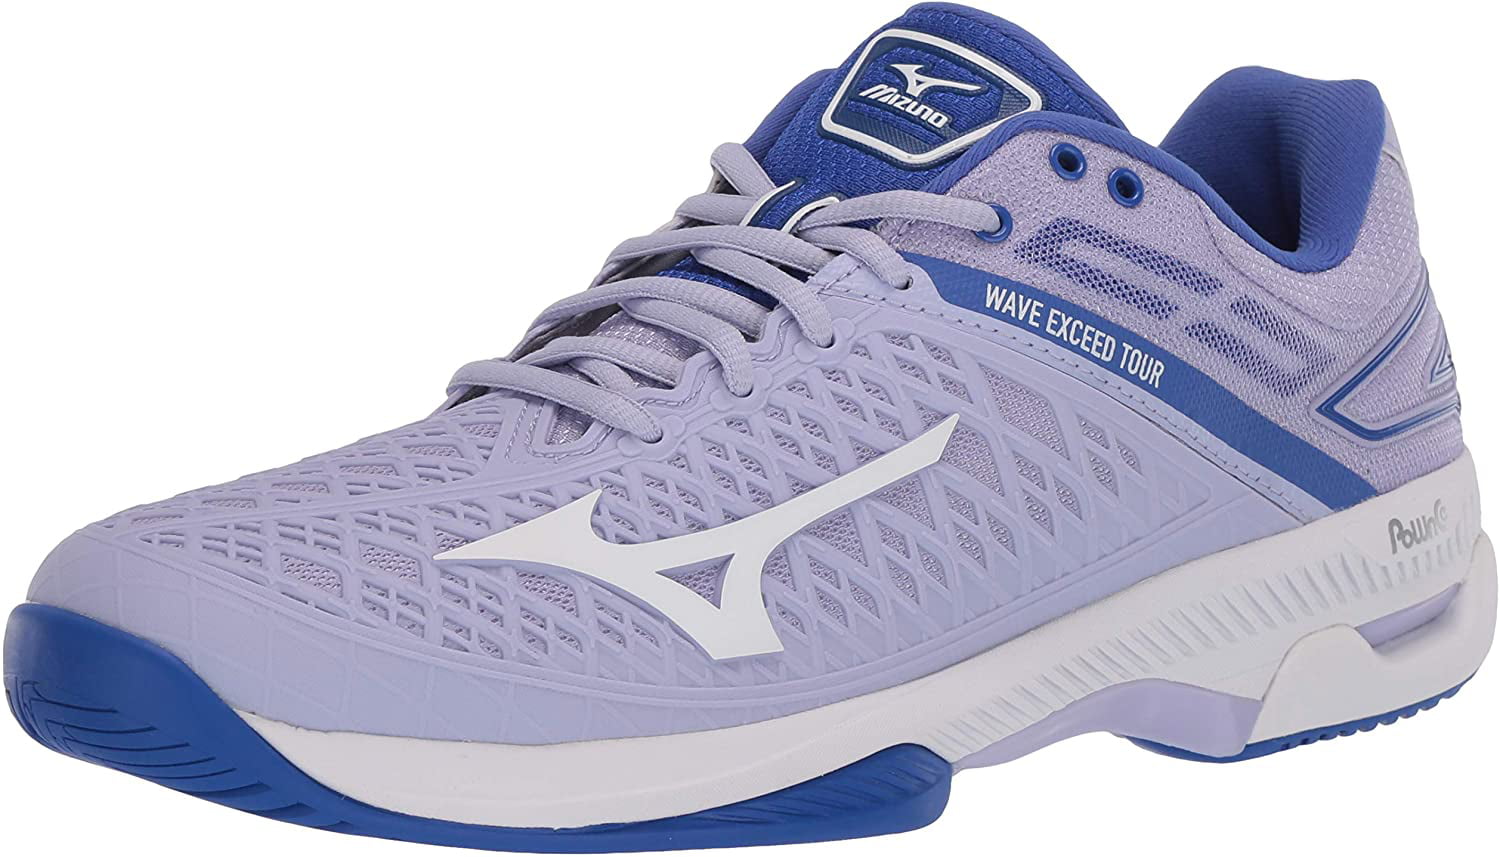 Mizuno Womens Wave Exceed Tour 3 All Court Tennis Shoes Purple Trainers 